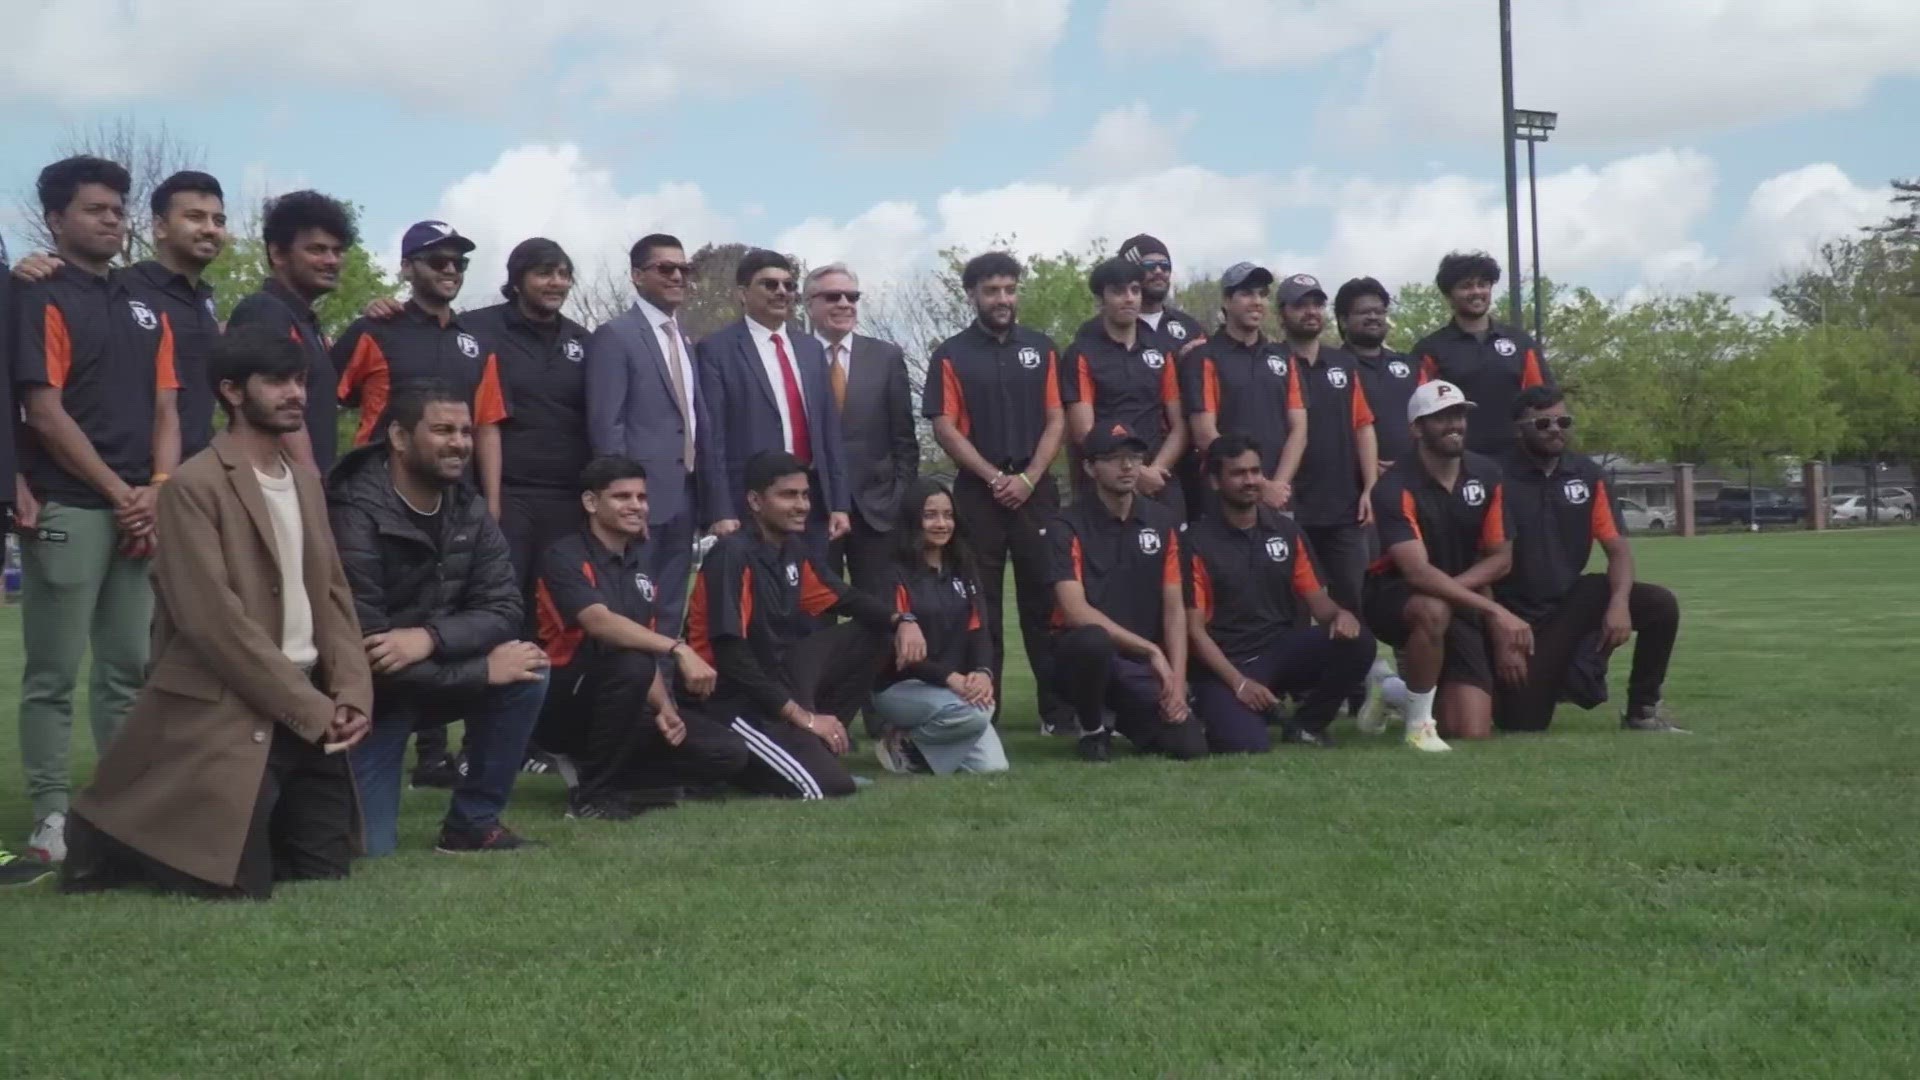 New cricket pitch opens at the University of the Pacific in Stockton